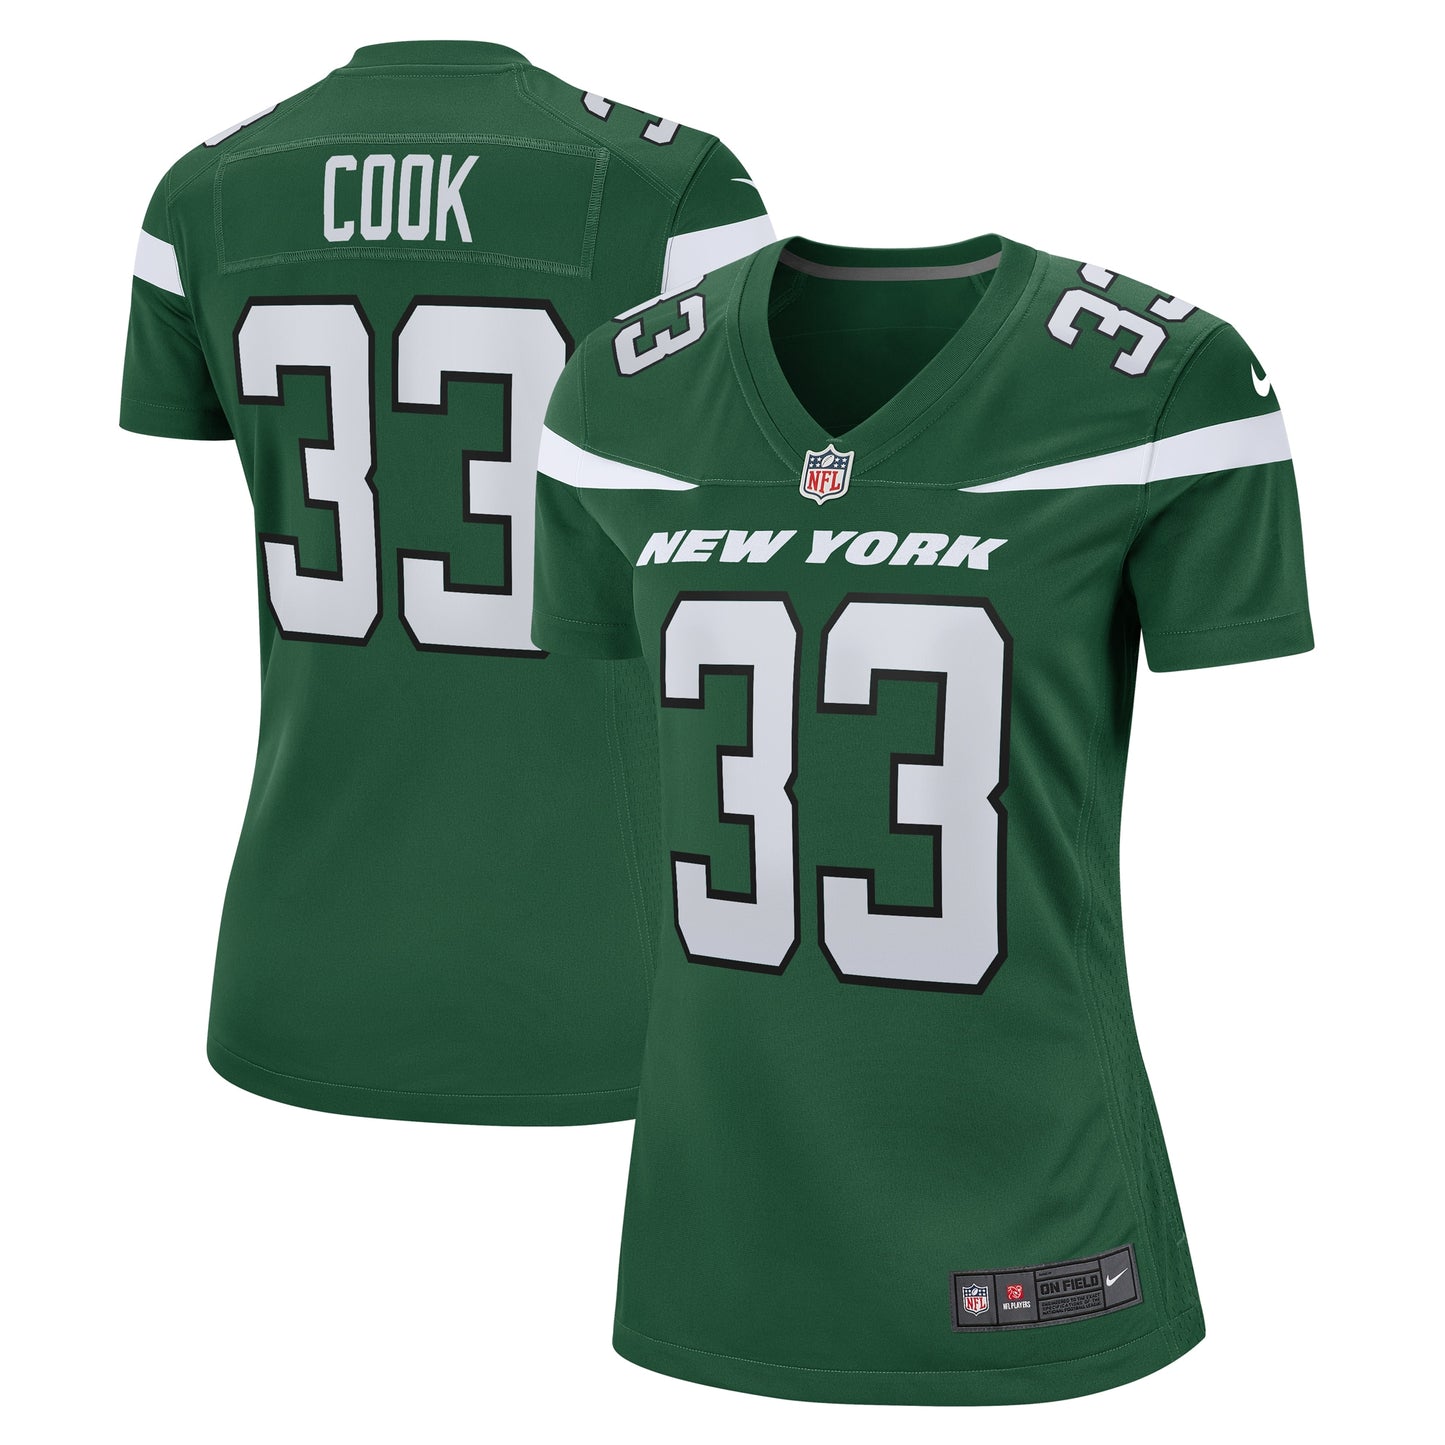 Dalvin Cook New York Jets Nike Women's Game Player Jersey - Gotham Green